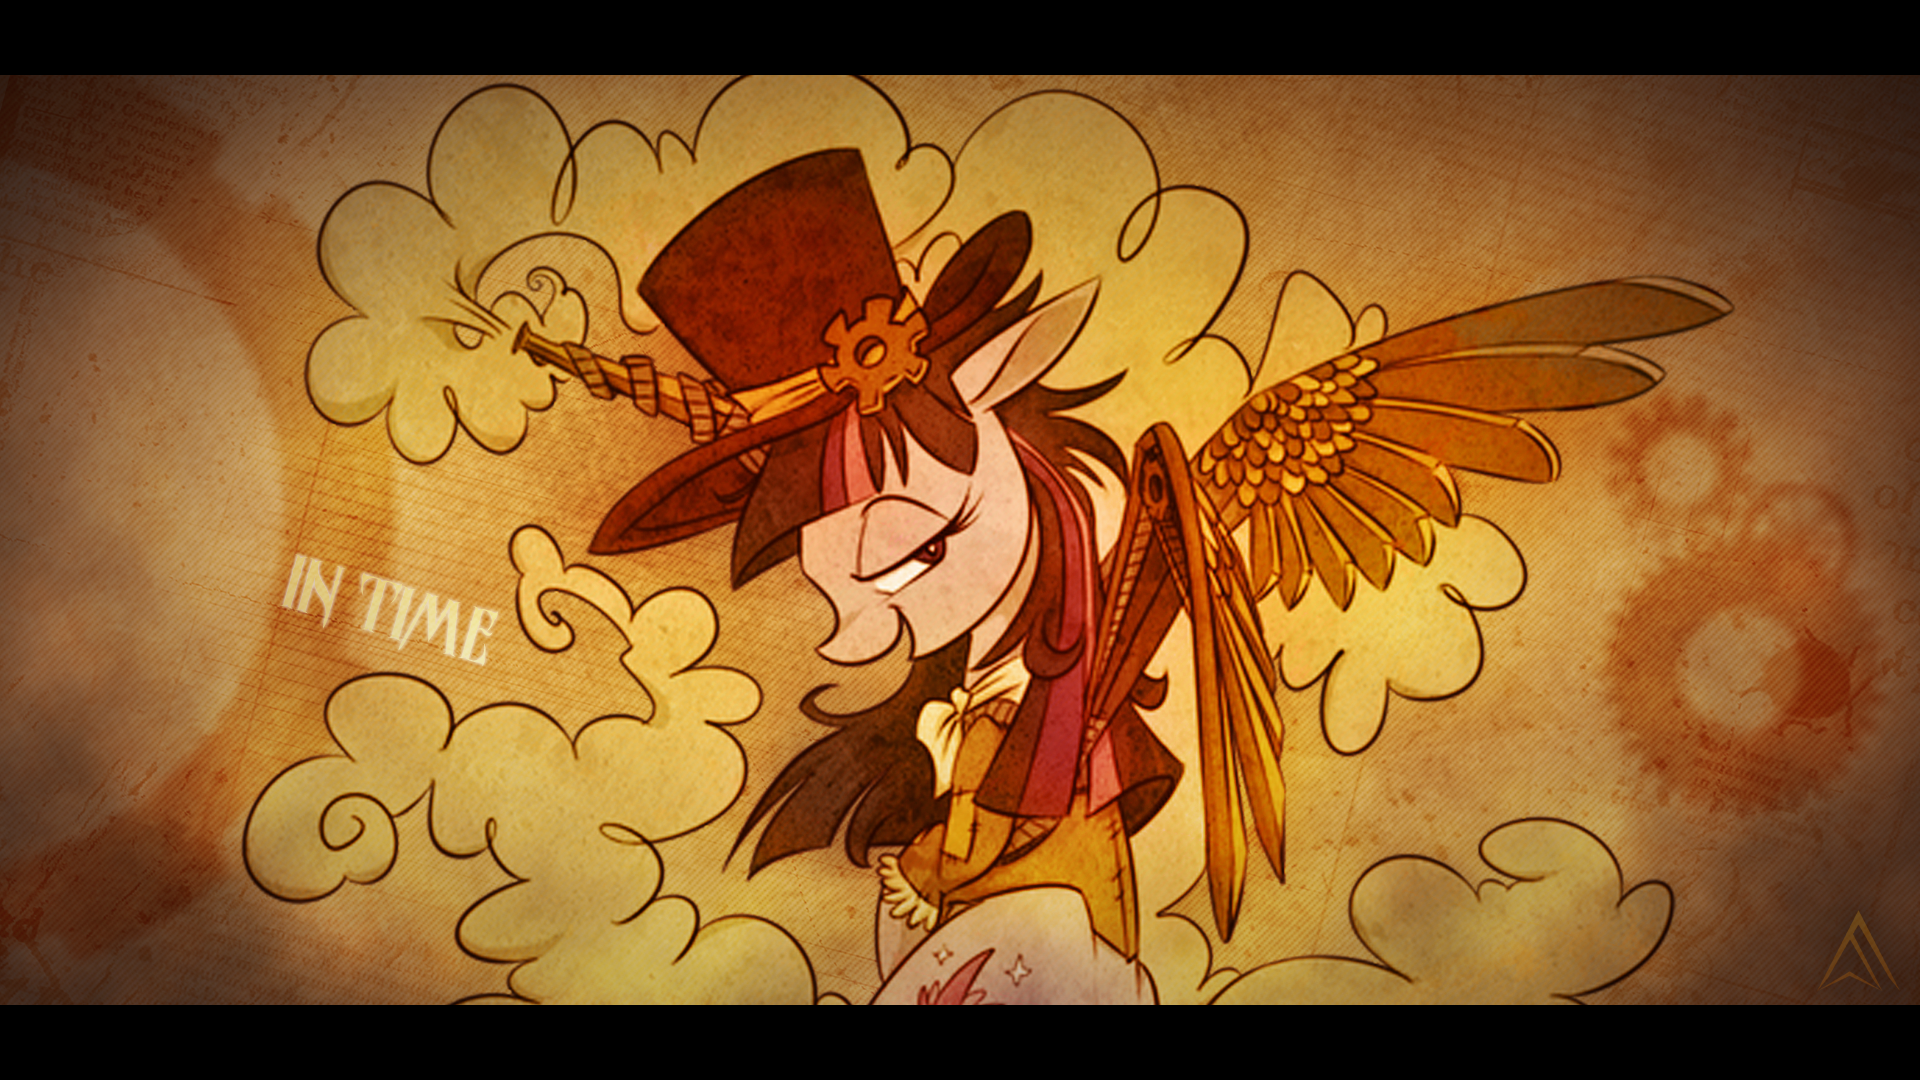 Steampunk Twilight by AAlegends and PashaPup